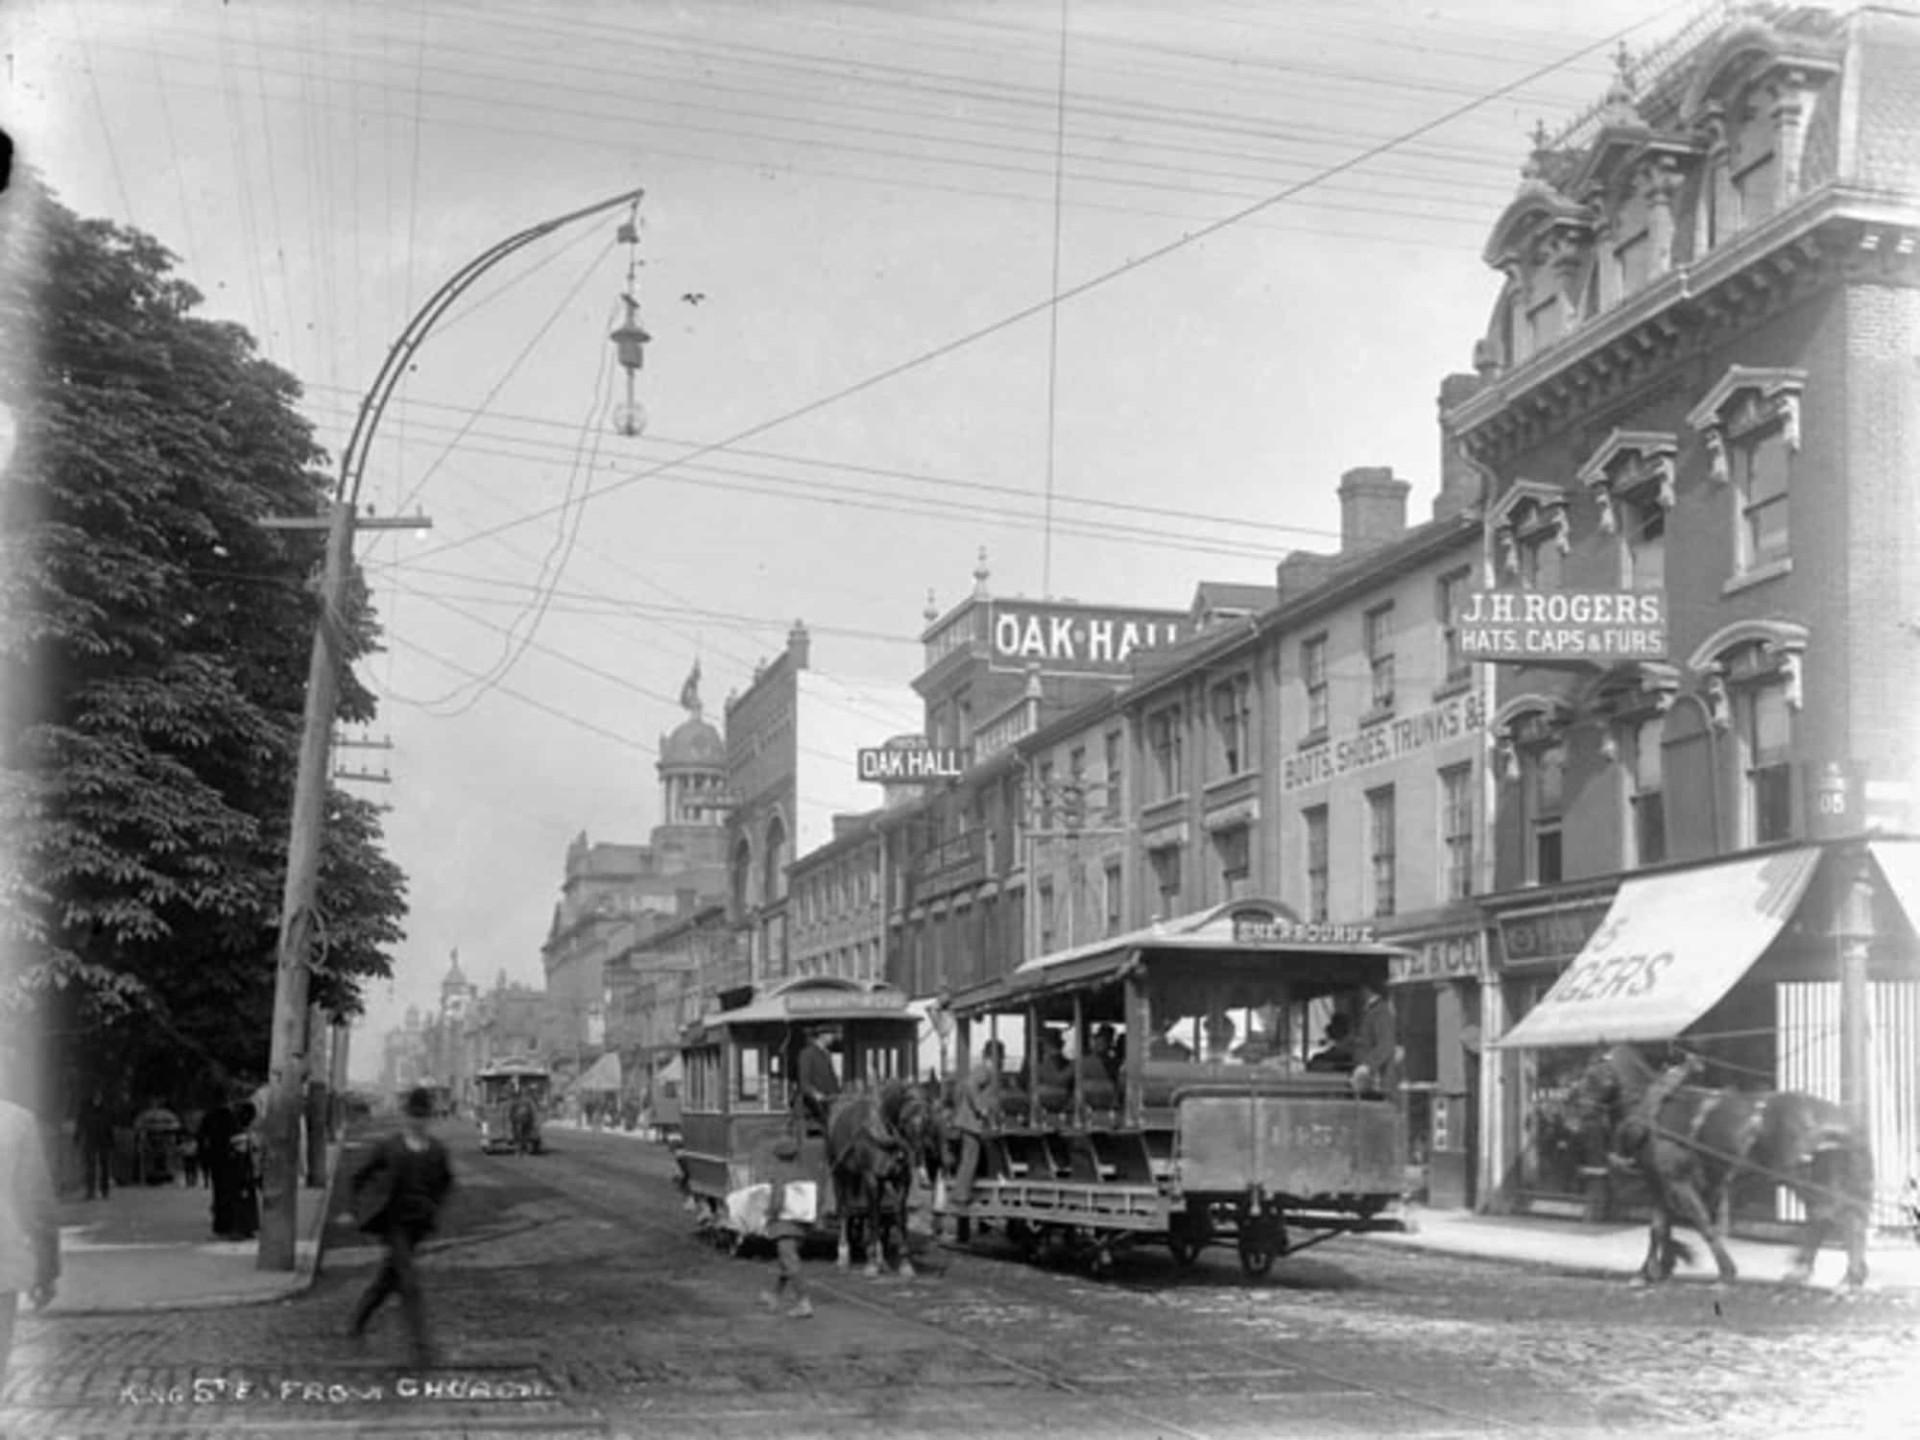 Streetcars pass through Toronto in 1890. This streetcar system was swapped out for electric-powered streetcars two years later.<p><a href="https://www.msn.com/en-us/community/channel/vid-7xx8mnucu55yw63we9va2gwr7uihbxwc68fxqp25x6tg4ftibpra?cvid=94631541bc0f4f89bfd59158d696ad7e">Follow us and access great exclusive content every day</a></p>